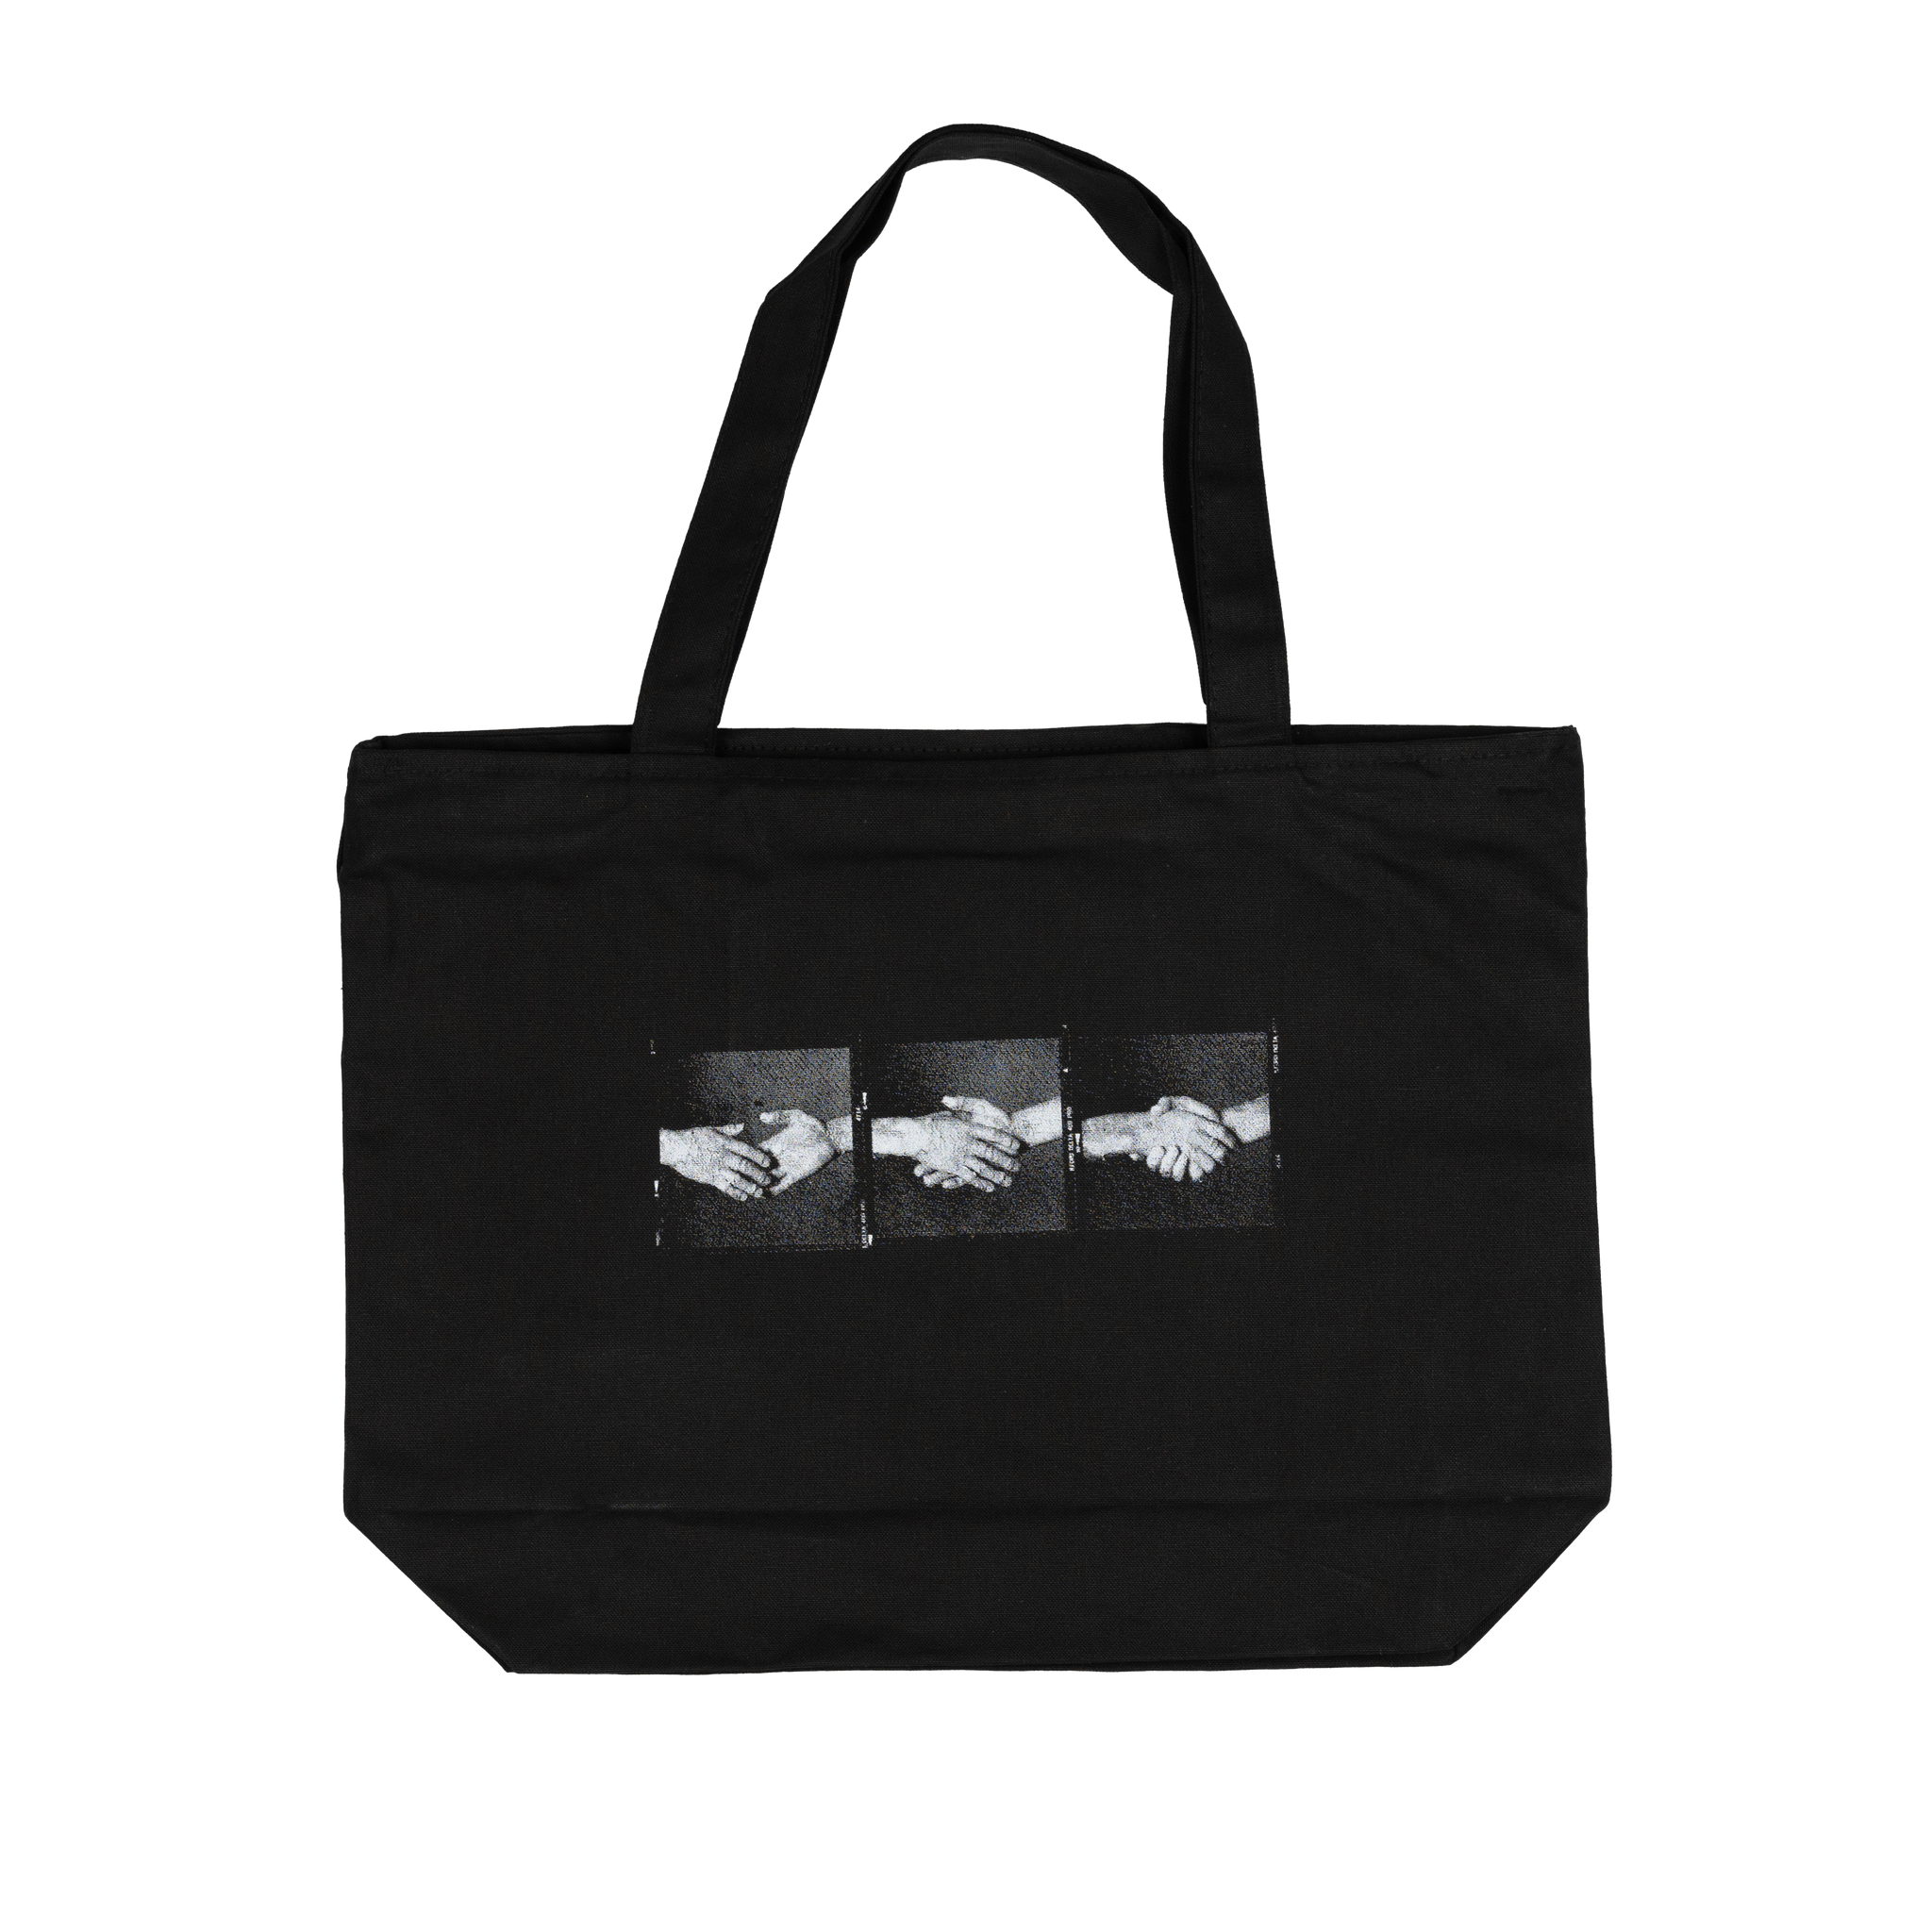 Imbued with humanity tote bag